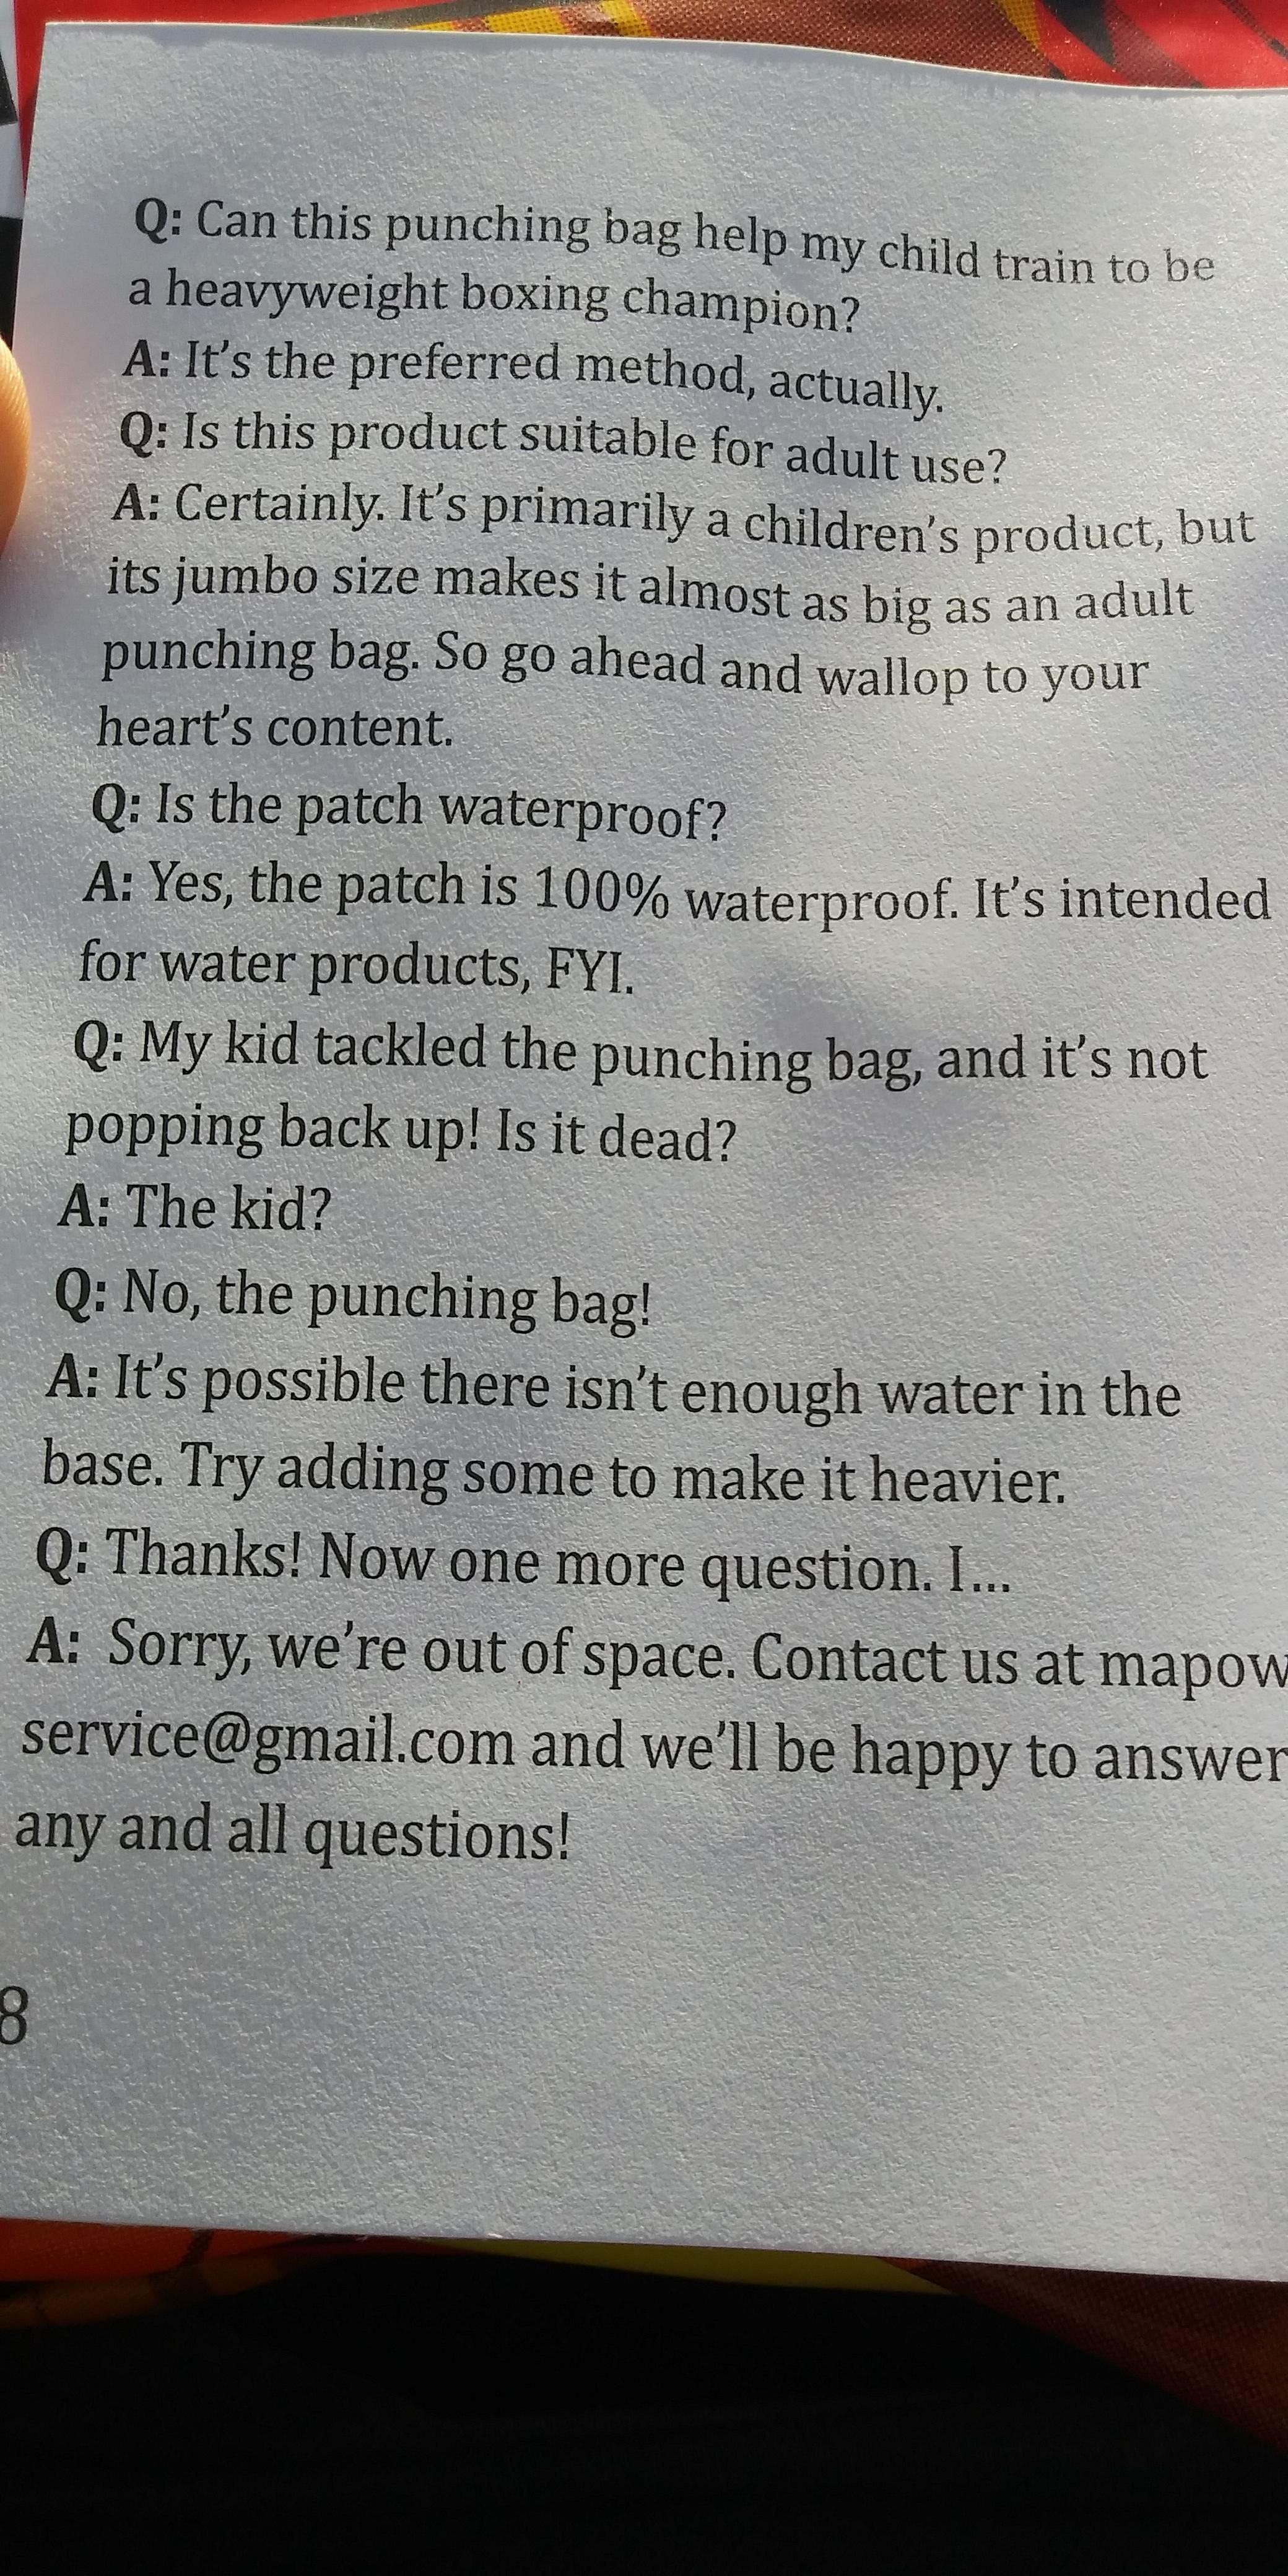 Thought you guys would enjoy this Q&A that came with a kids inflatable boxing bag